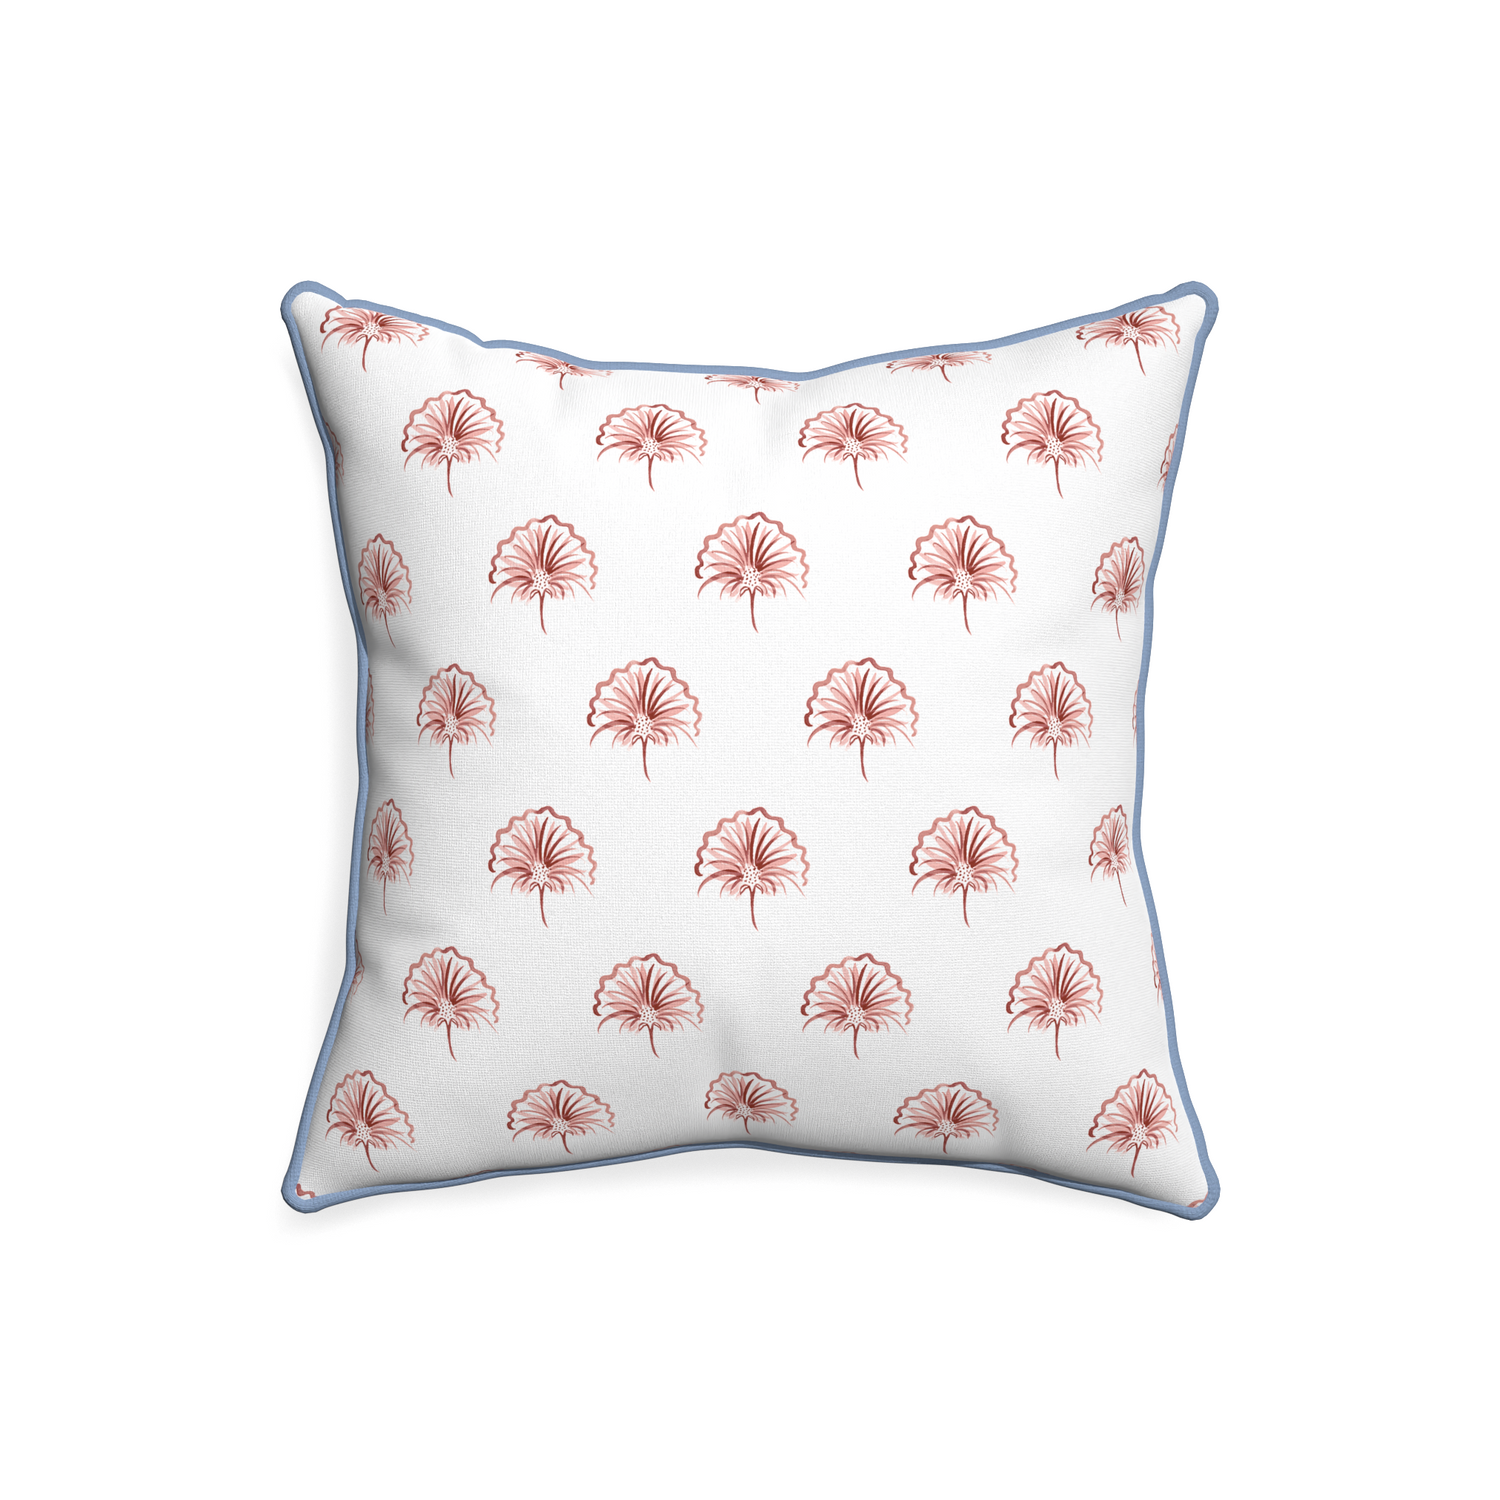 20-square penelope rose custom floral pinkpillow with sky piping on white background